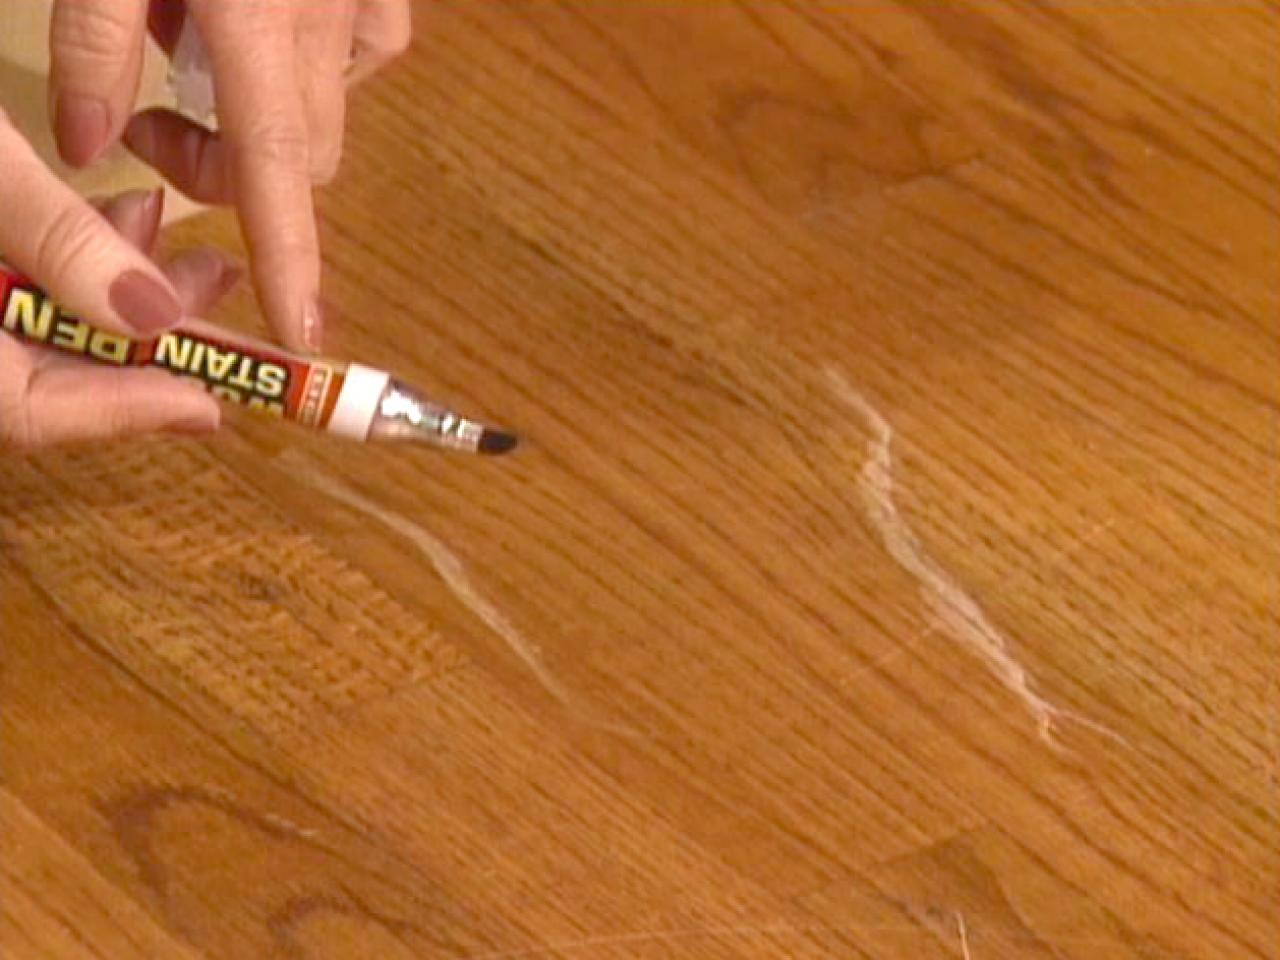 How To Touch Up Wood Floors Tos Diy, How To Get Scratches Out Of Laminate Hardwood Floors